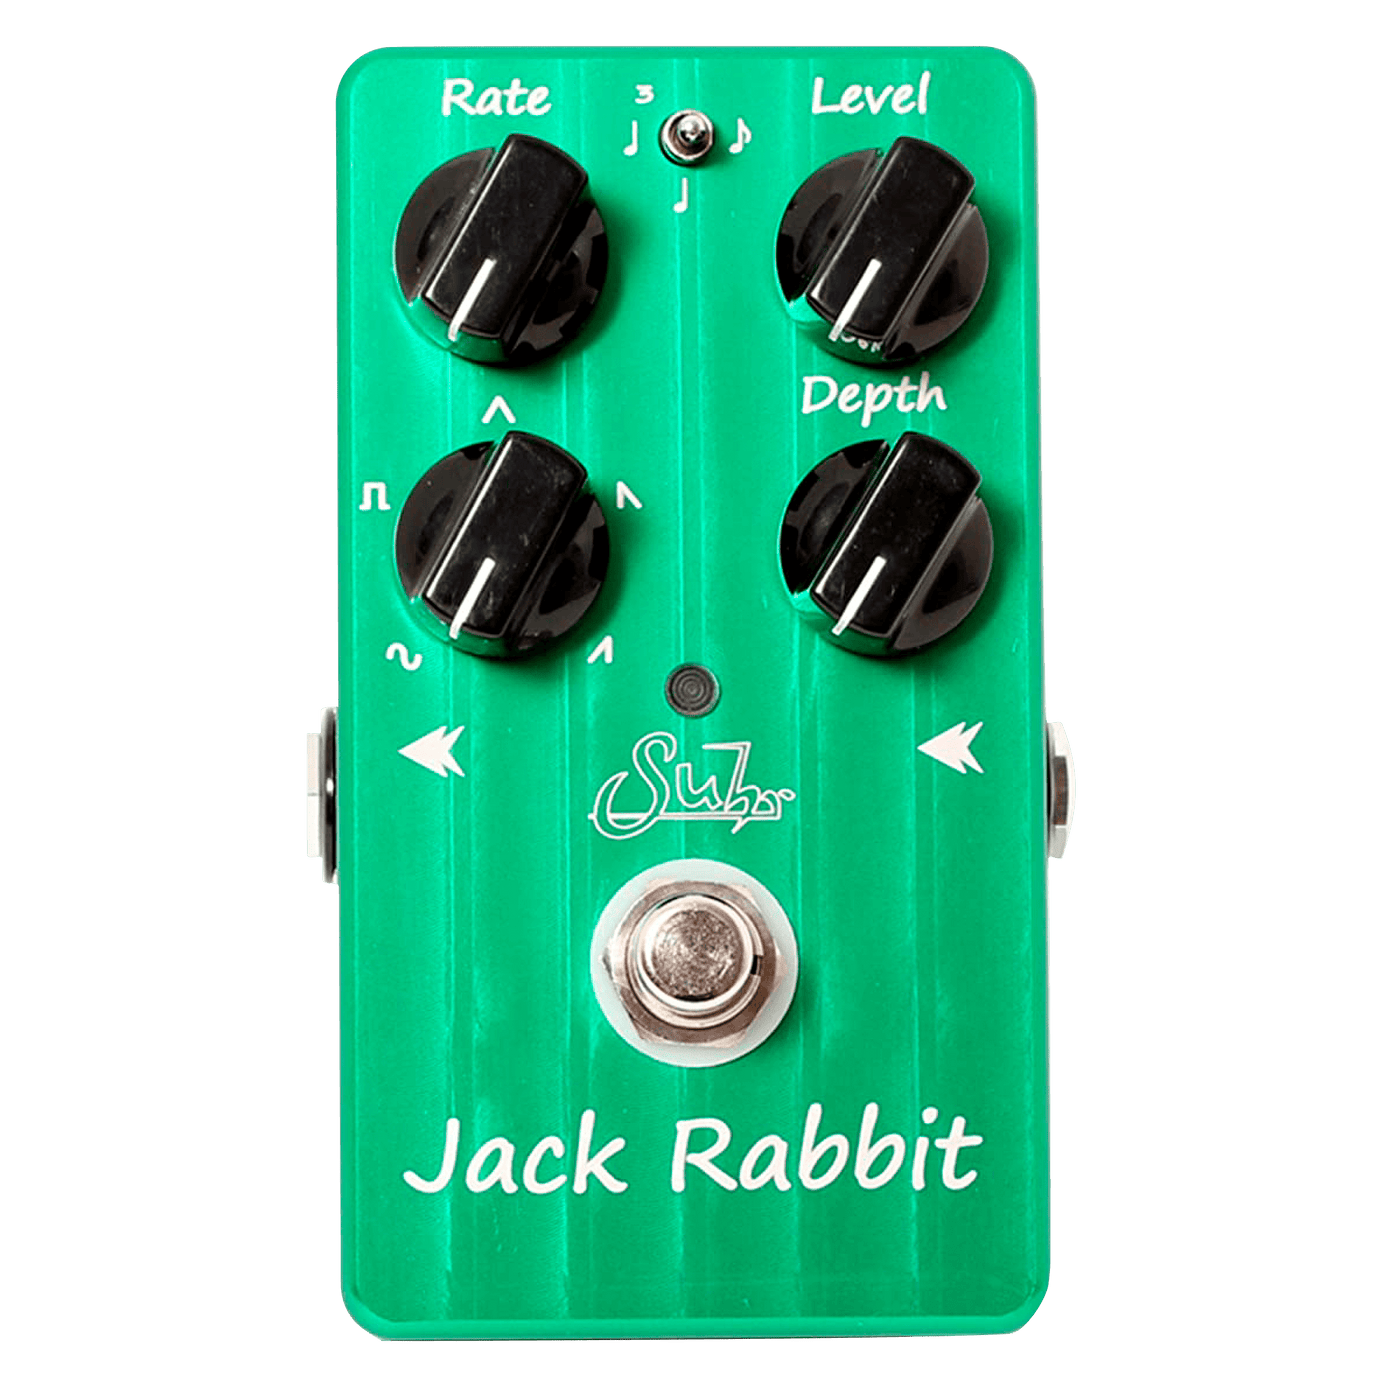 Suhr Jack Rabbit Tremolo - $259990 - Gearhub - Jack Rabbit is a high quality analog pedal, that delivers a wide variety of tremolo effects – from warm wobble to whacked out. It features simple control over tempo by incorporating both tap, and strum tempo modes. It’s modulation rate spans from 1Hz to 20Hz and utilizes a tempo subdivision switch. The Jack Rabbit Tremolo is housed in a sturdy, aluminum enclosure for maximum protection from abuse. It can be remote controlled via the FX Link jack. Pedal Type • A